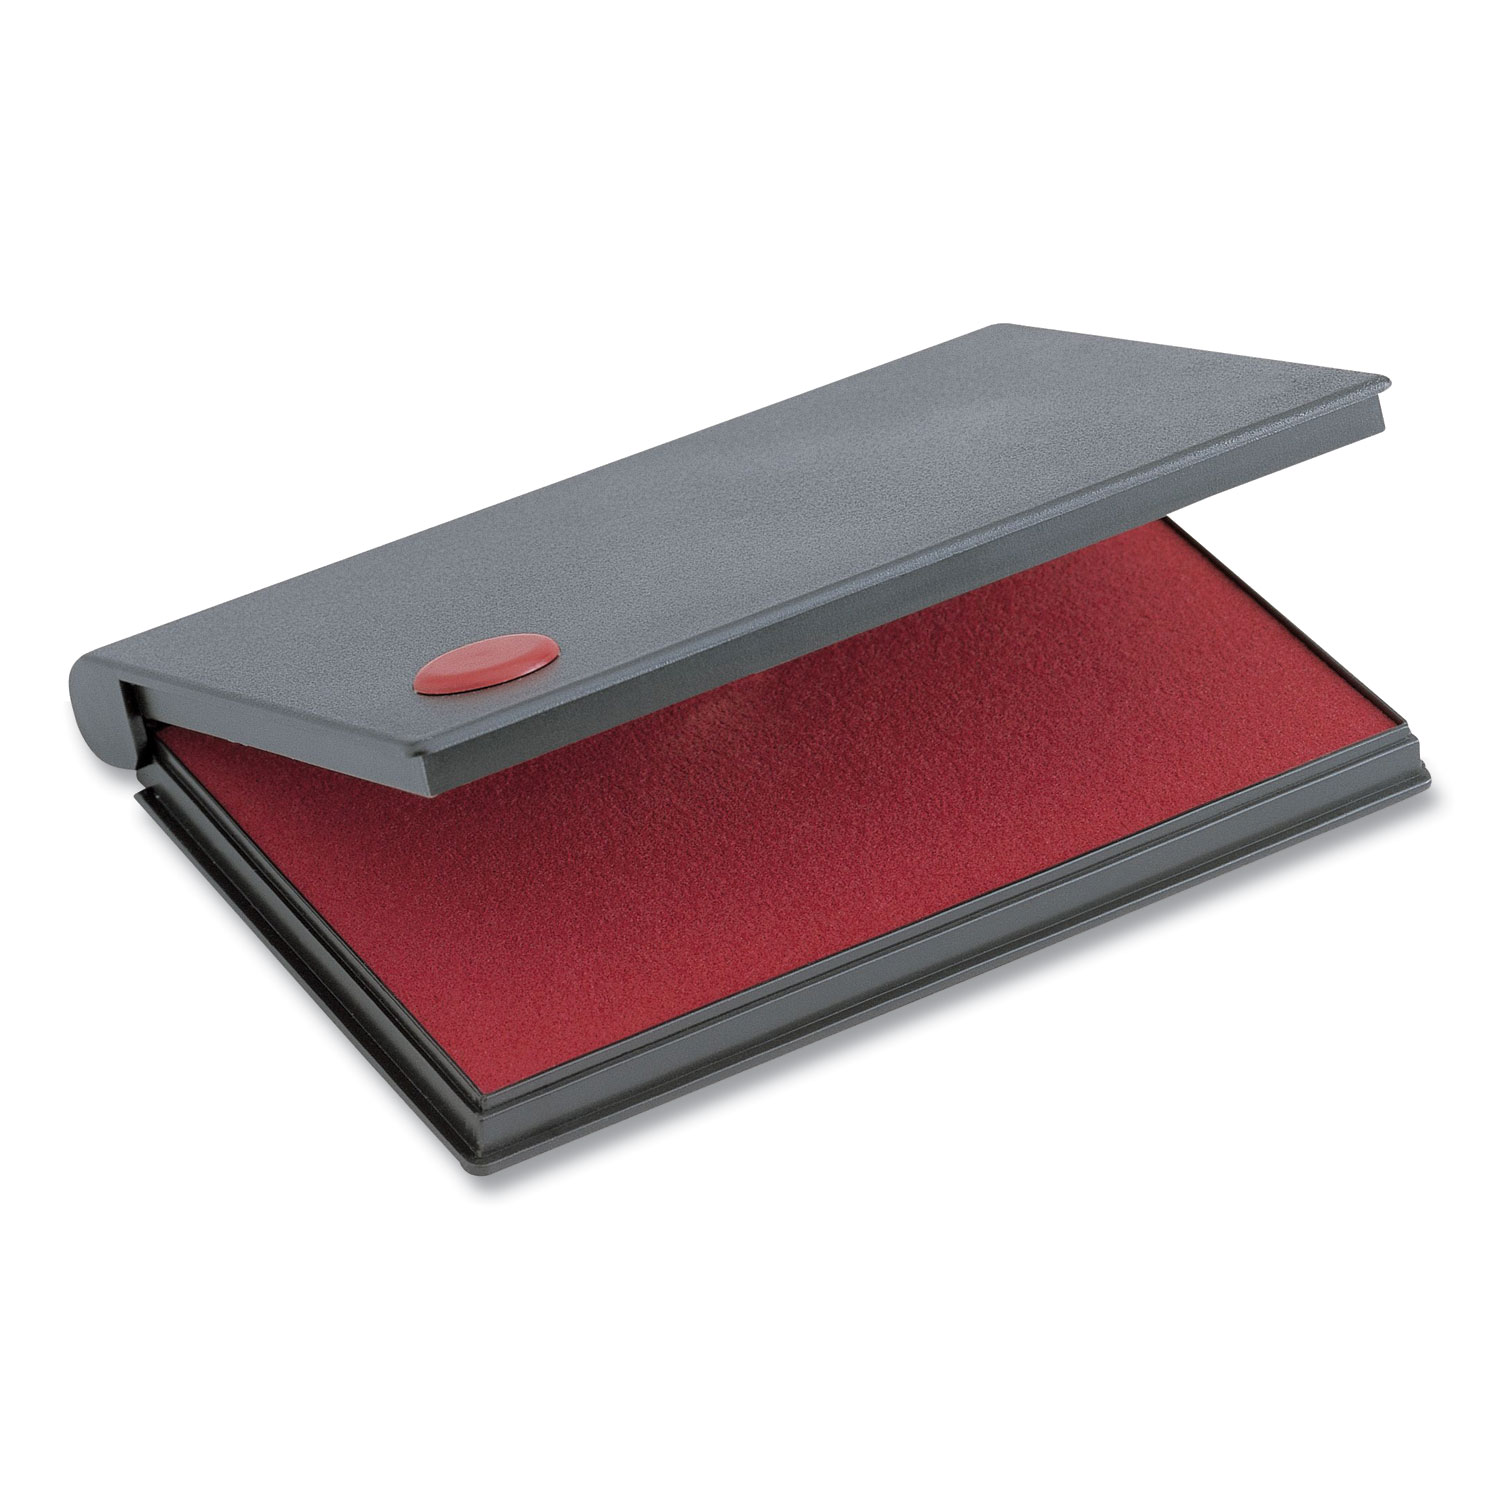  COSCO 090411 2000 PLUS One-Color Felt Stamp Pad, #2, 6.25 x 3.5, Red (CSC652167) 